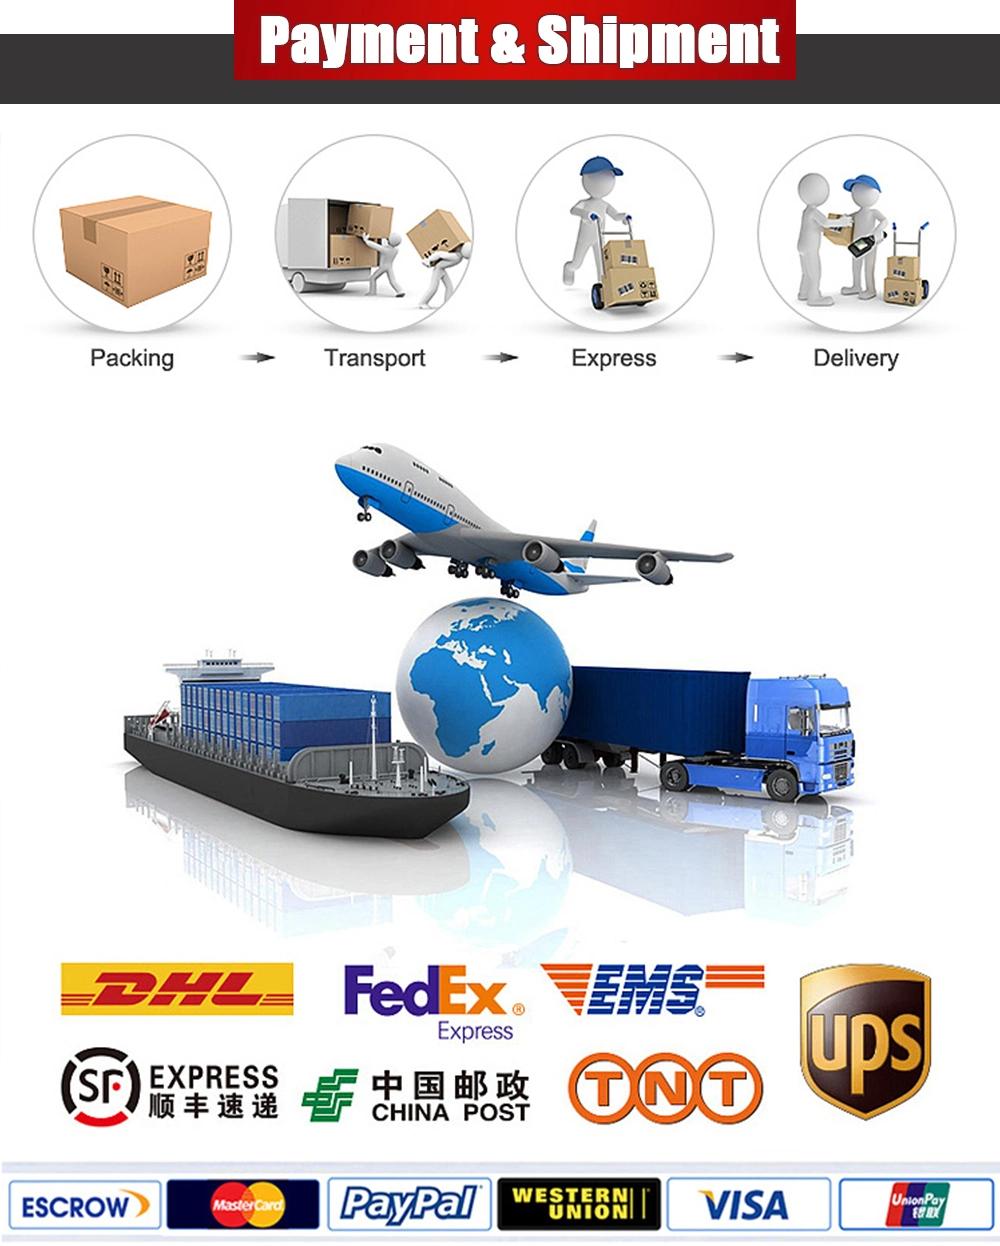 Industrial UV Flying Non-Standard Laser Marking Printer Equipment Machine with Visual Positioning System